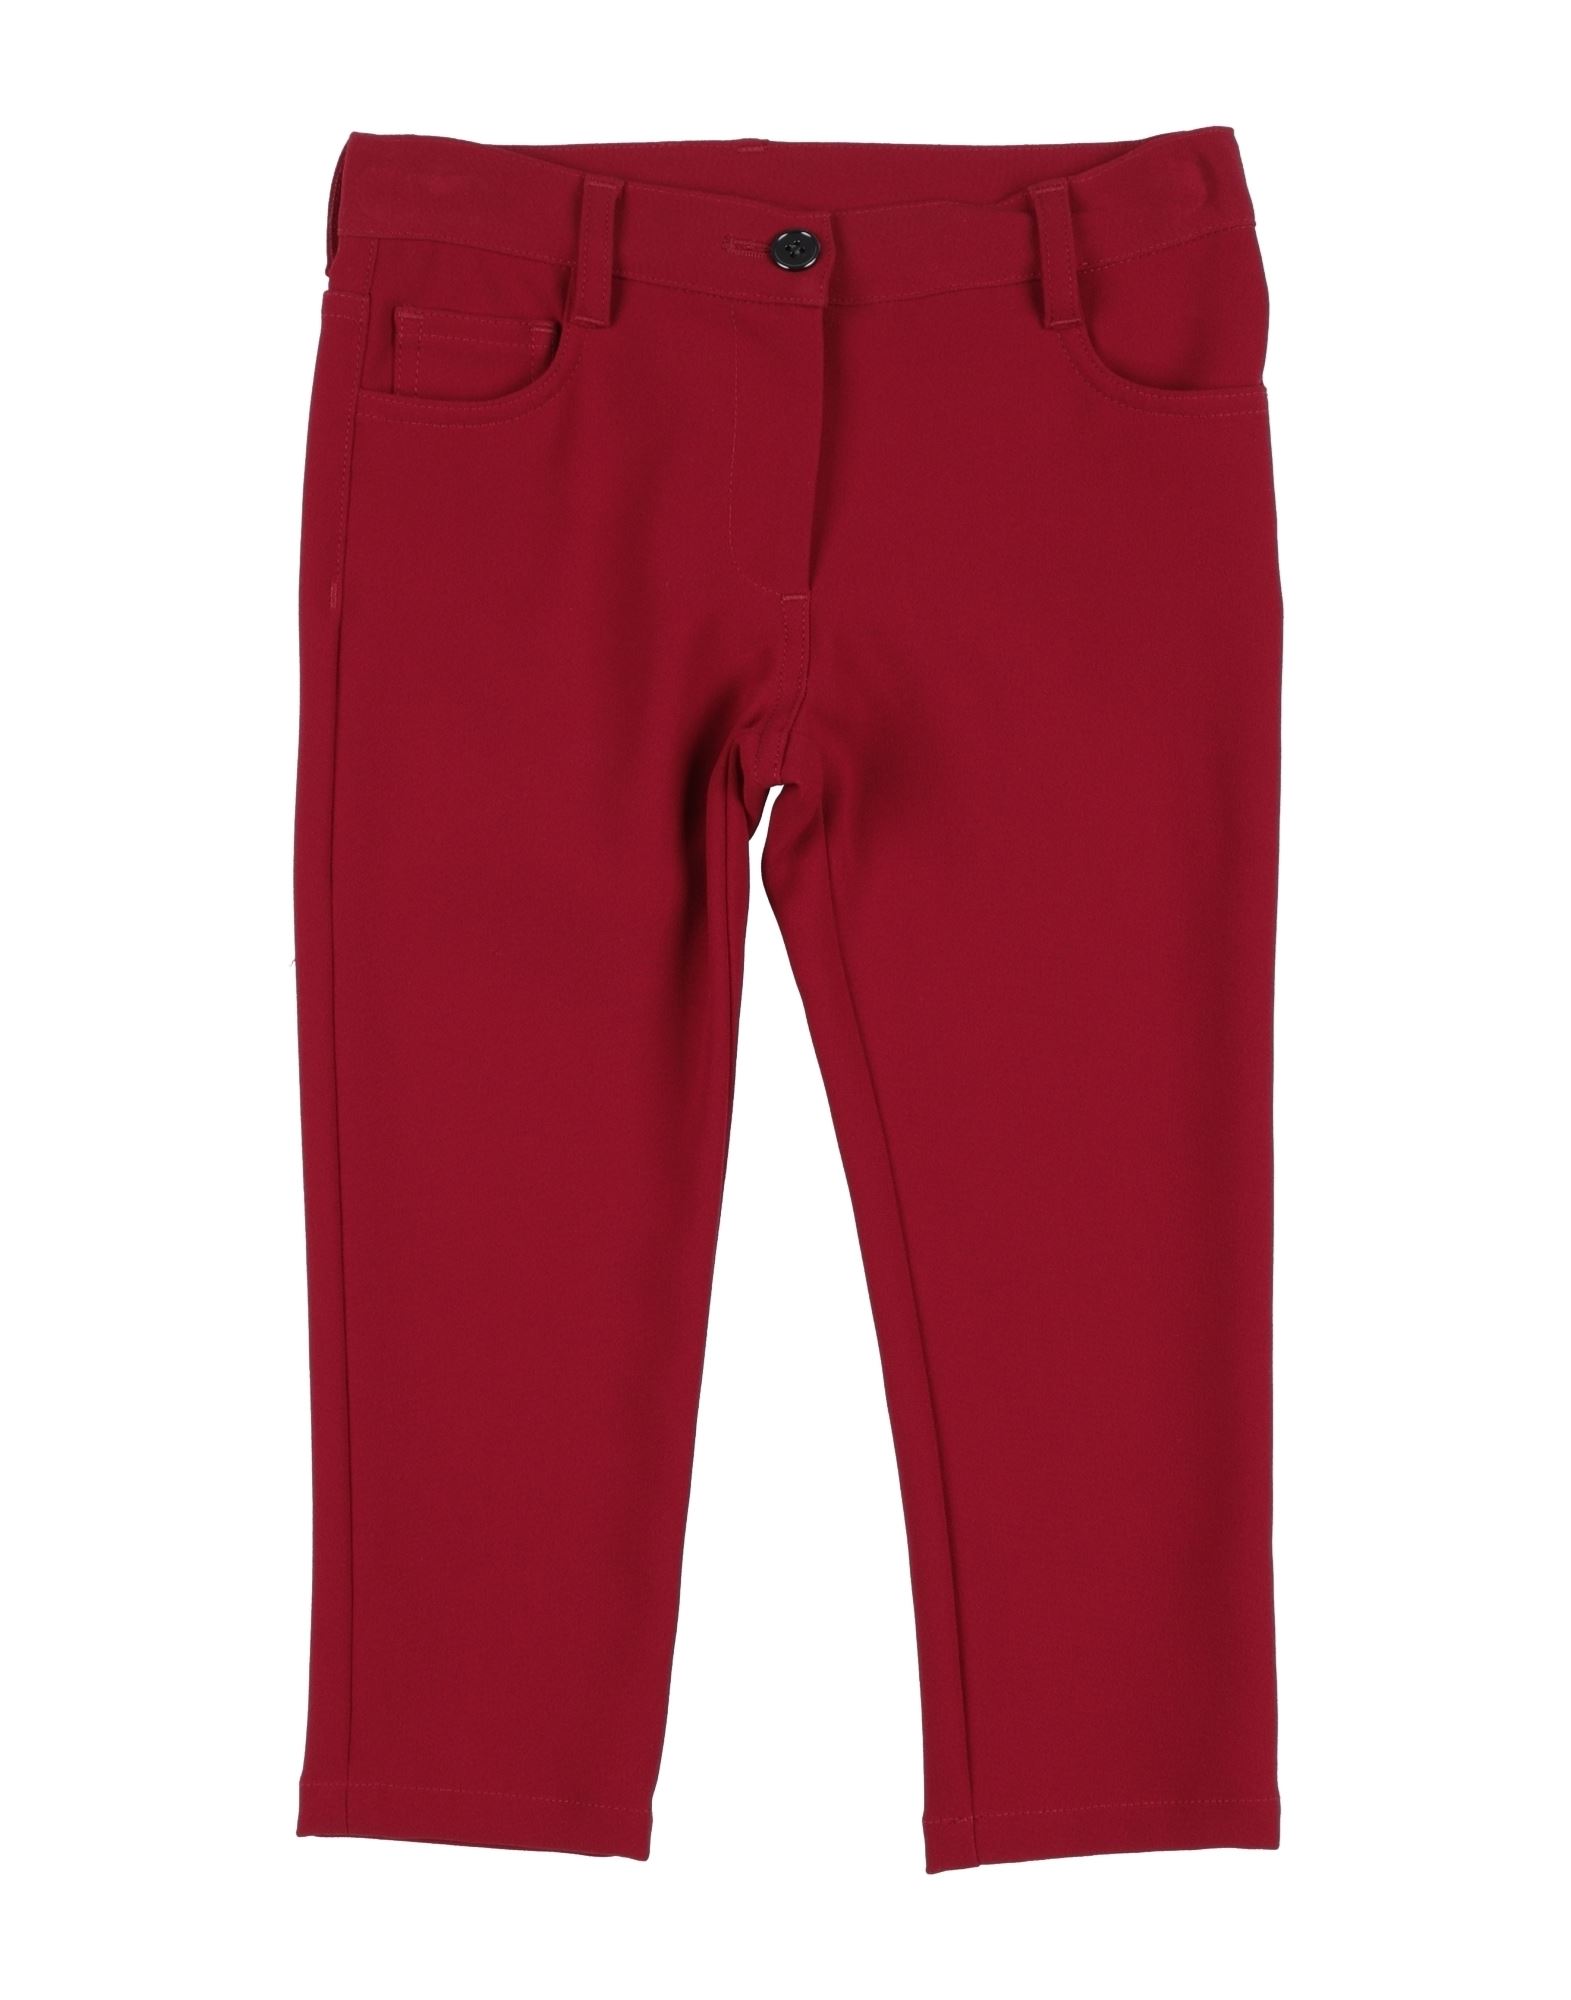 Dolce & Gabbana Kids'  Toddler Girl Pants Burgundy Size 3 Viscose, Acetate, Eco Polyester In Red